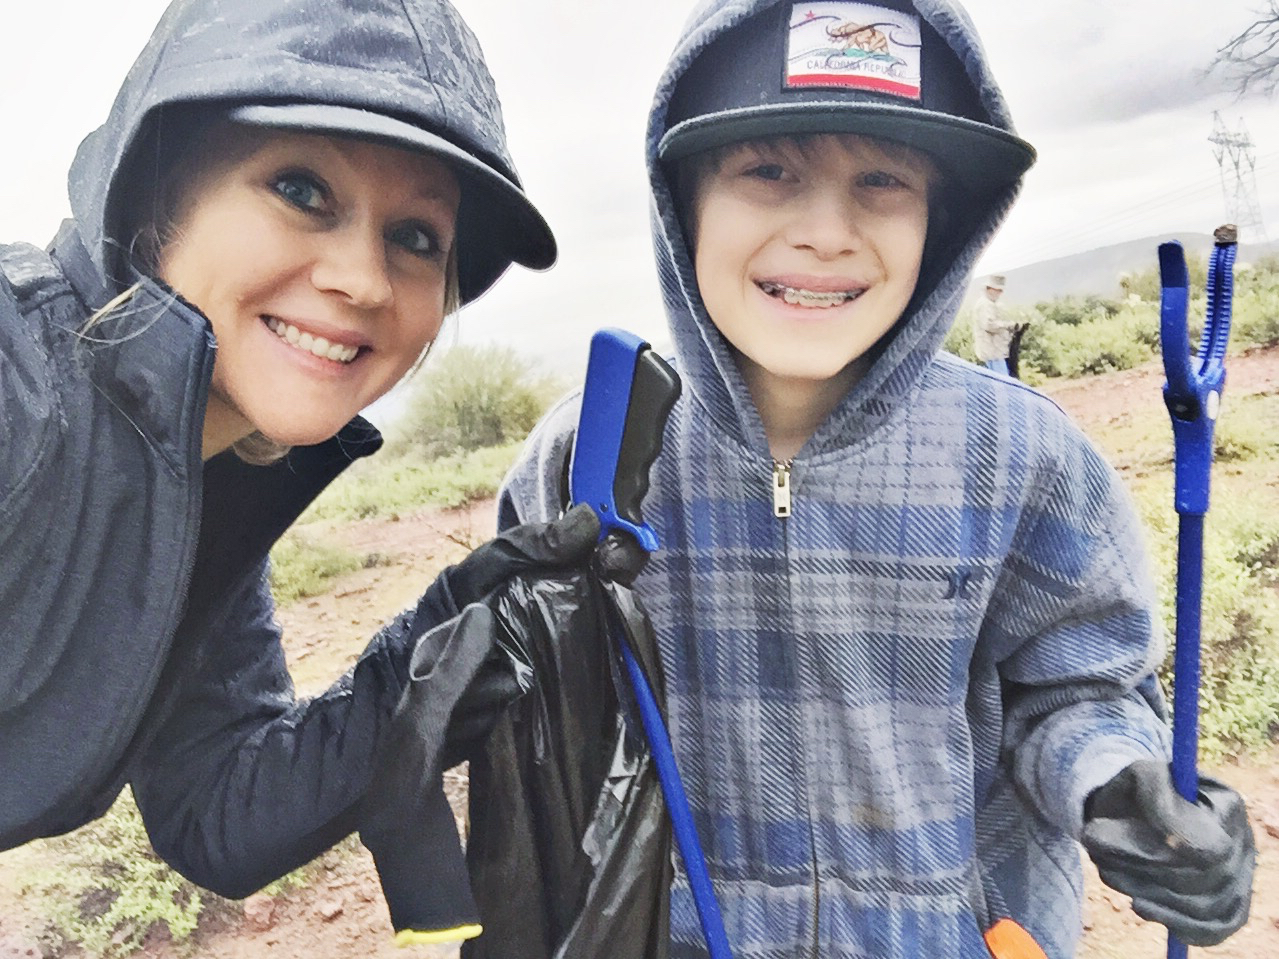 Table Mesa Recreation area cleanup in Arizona with Discount Tire